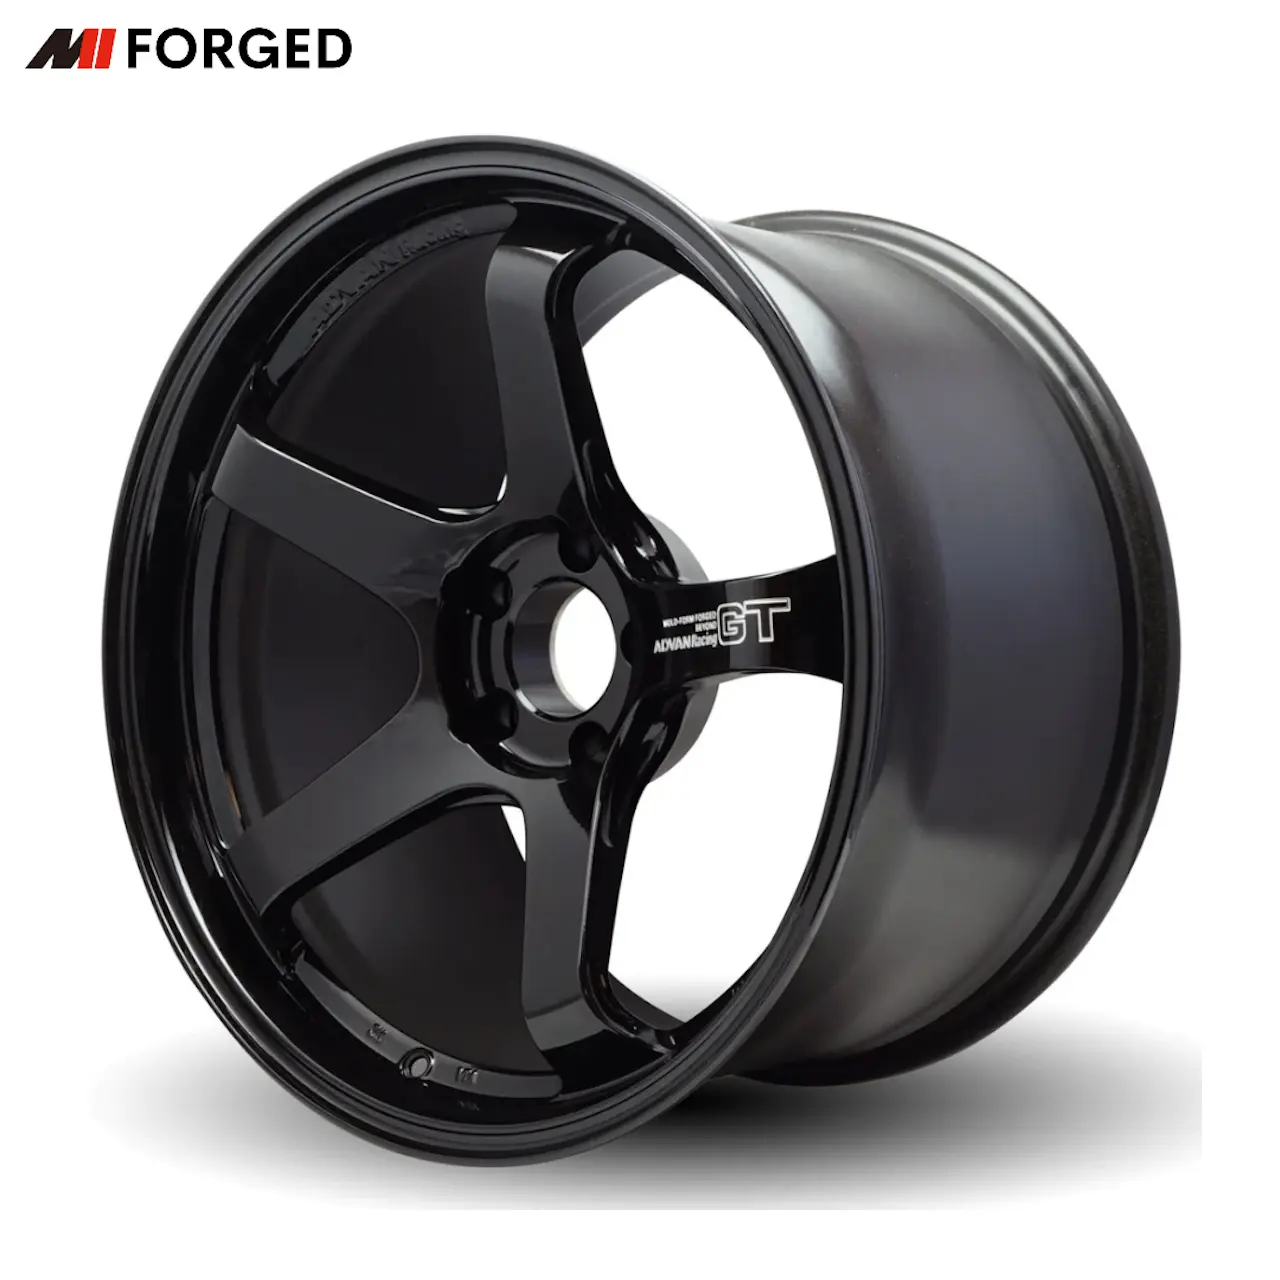 MN Forged Explore Advan GT Wheels Premium Racing and Beyond Collection for Supra 350Z 370Z BRZ利用可能15〜18x9.5